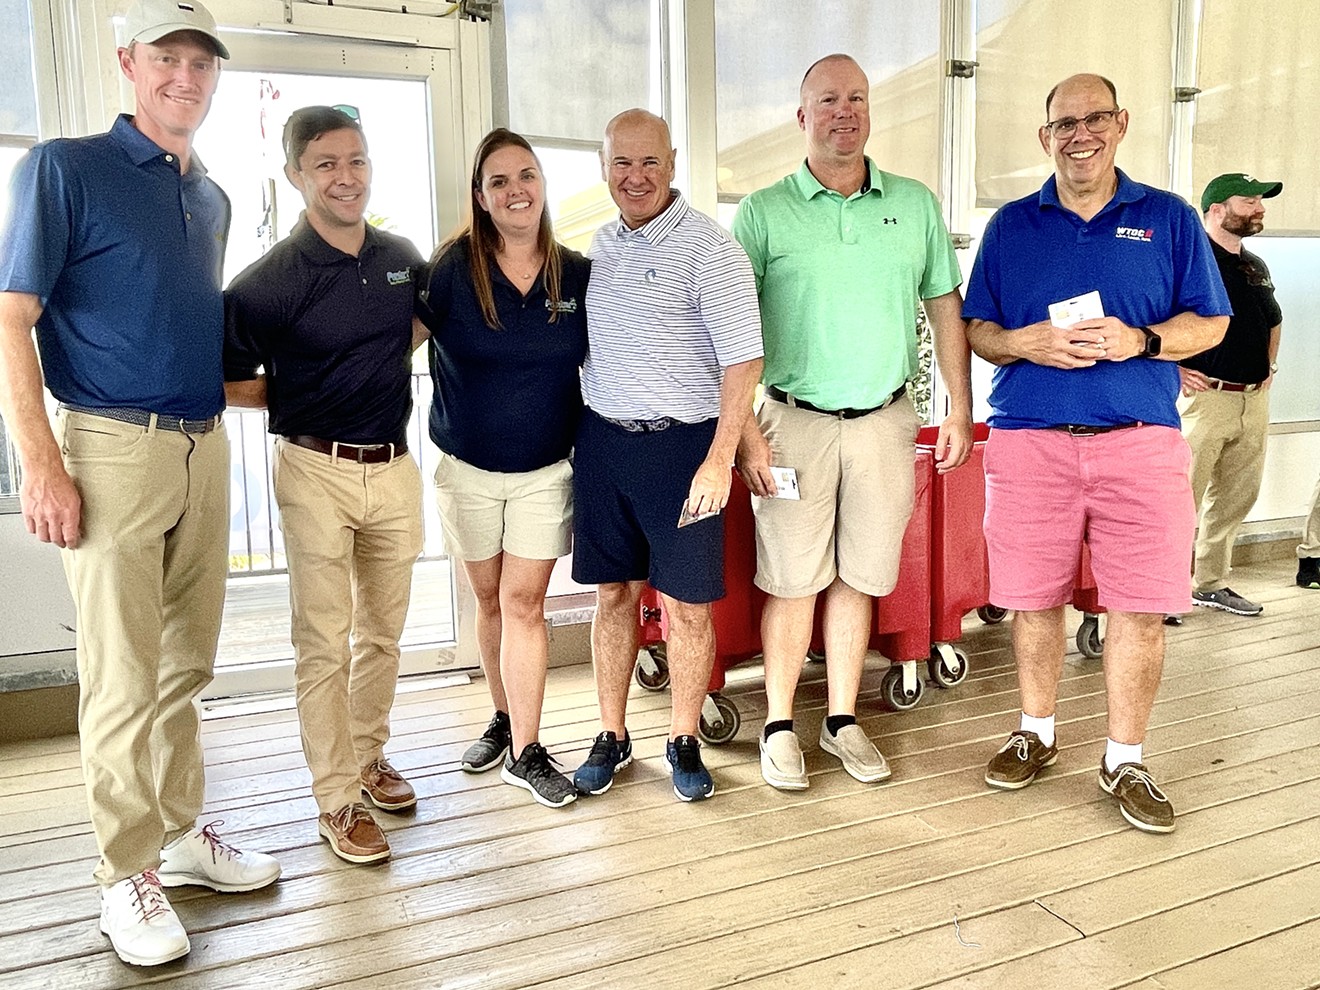 Parker’s 9th Annual Fueling the Community Charity Golf Tournament